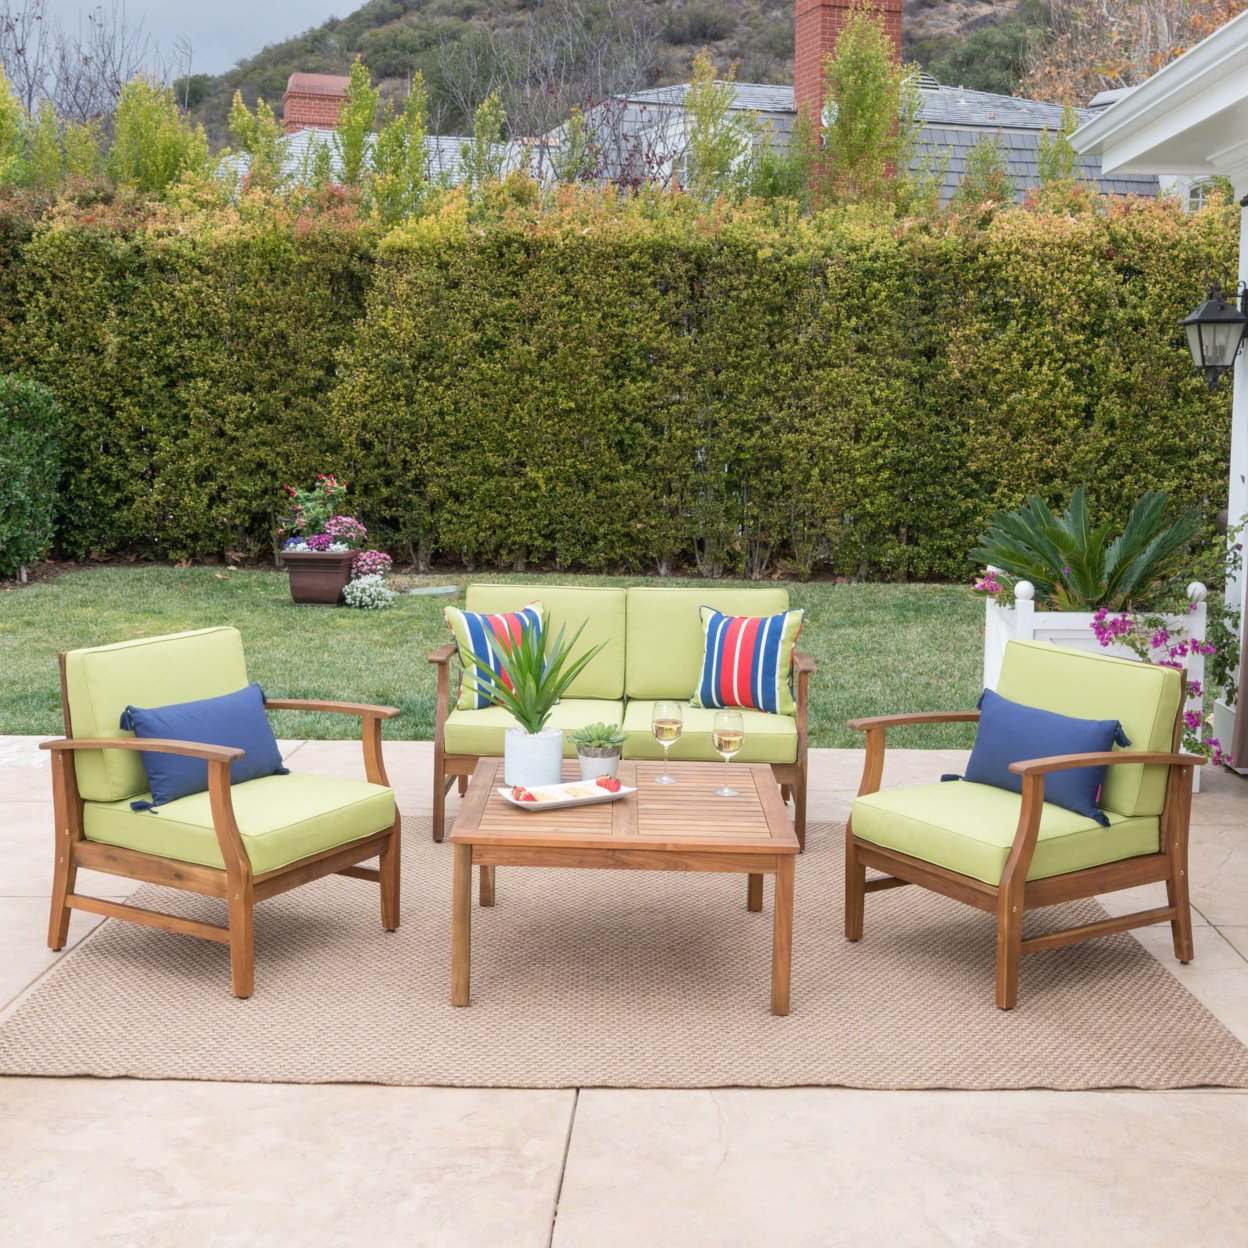 Lorelei Outdoor 4 Seat Teak Finished Acacia Wood Chat Set With Water Resistant Cushions - Green